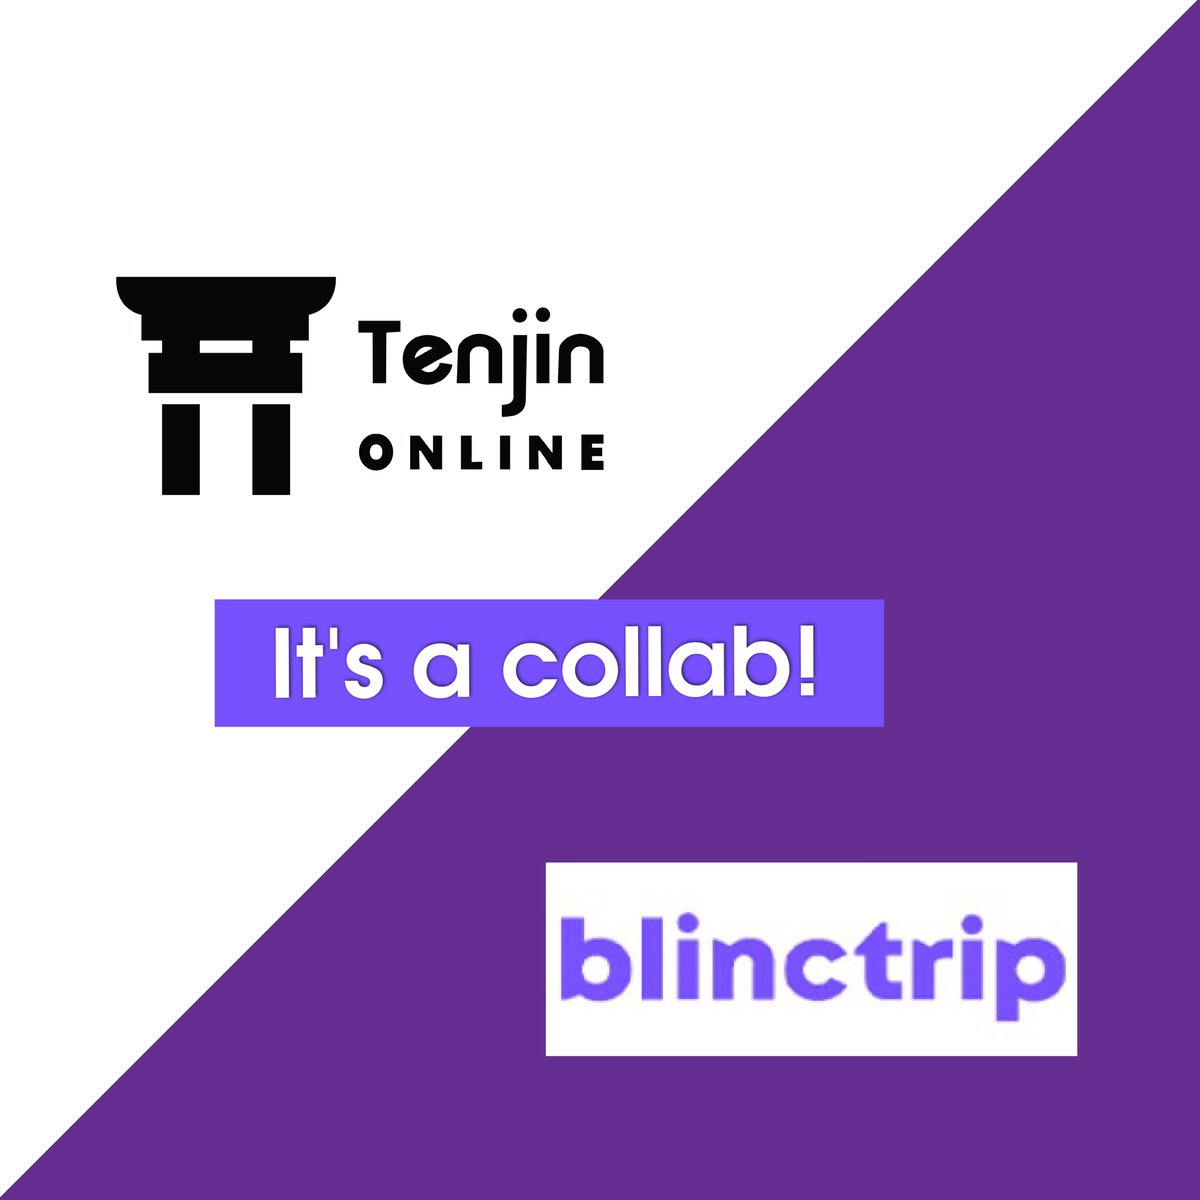 We are thrilled to collaborate with Blinctrip, a flight booking app to provide our exceptional app testing services. Together, we share a common goal of providing customers with a reliable, efficient, and user-friendly platform

#softwaretesting #testing #apptesting @YethiHQ